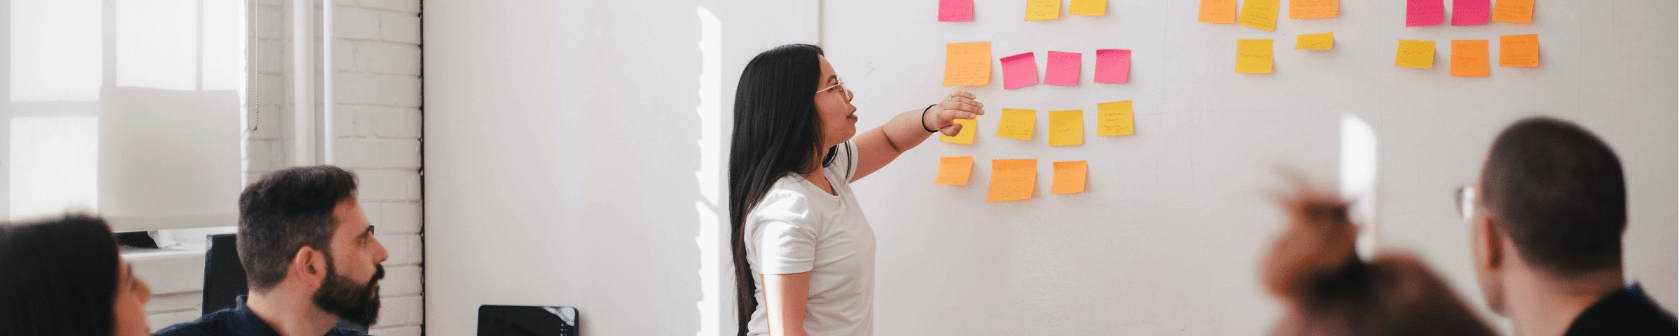 Woman placing sticky notes on a whiteboard